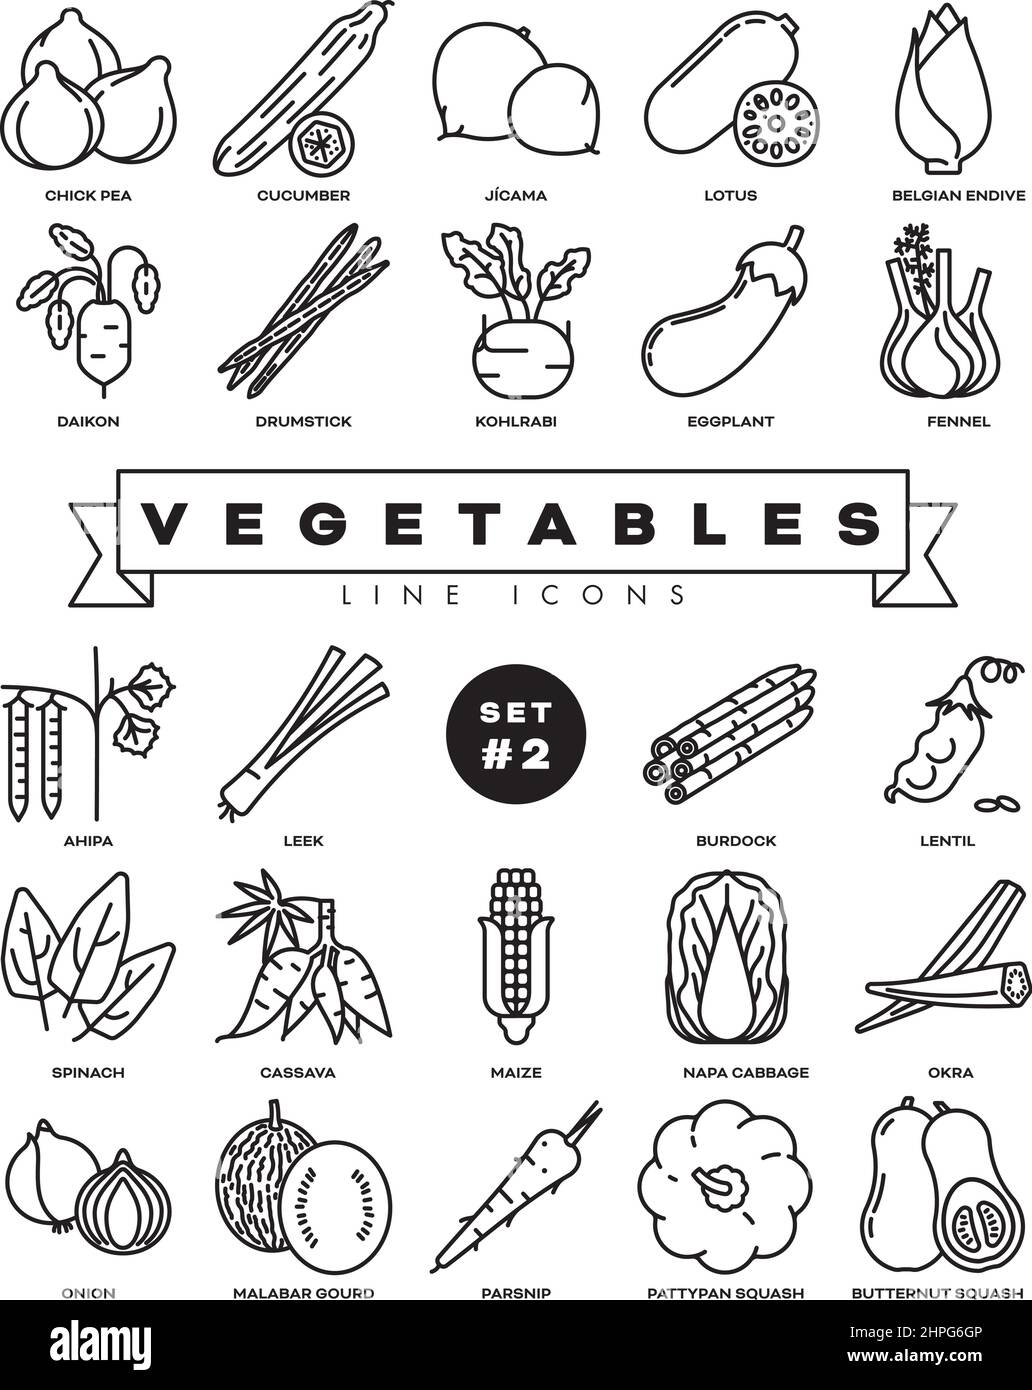 Collection of vegetables vector outline icons. Illustration of healthy food from all over the world. Set 2 of 3. Stock Vector